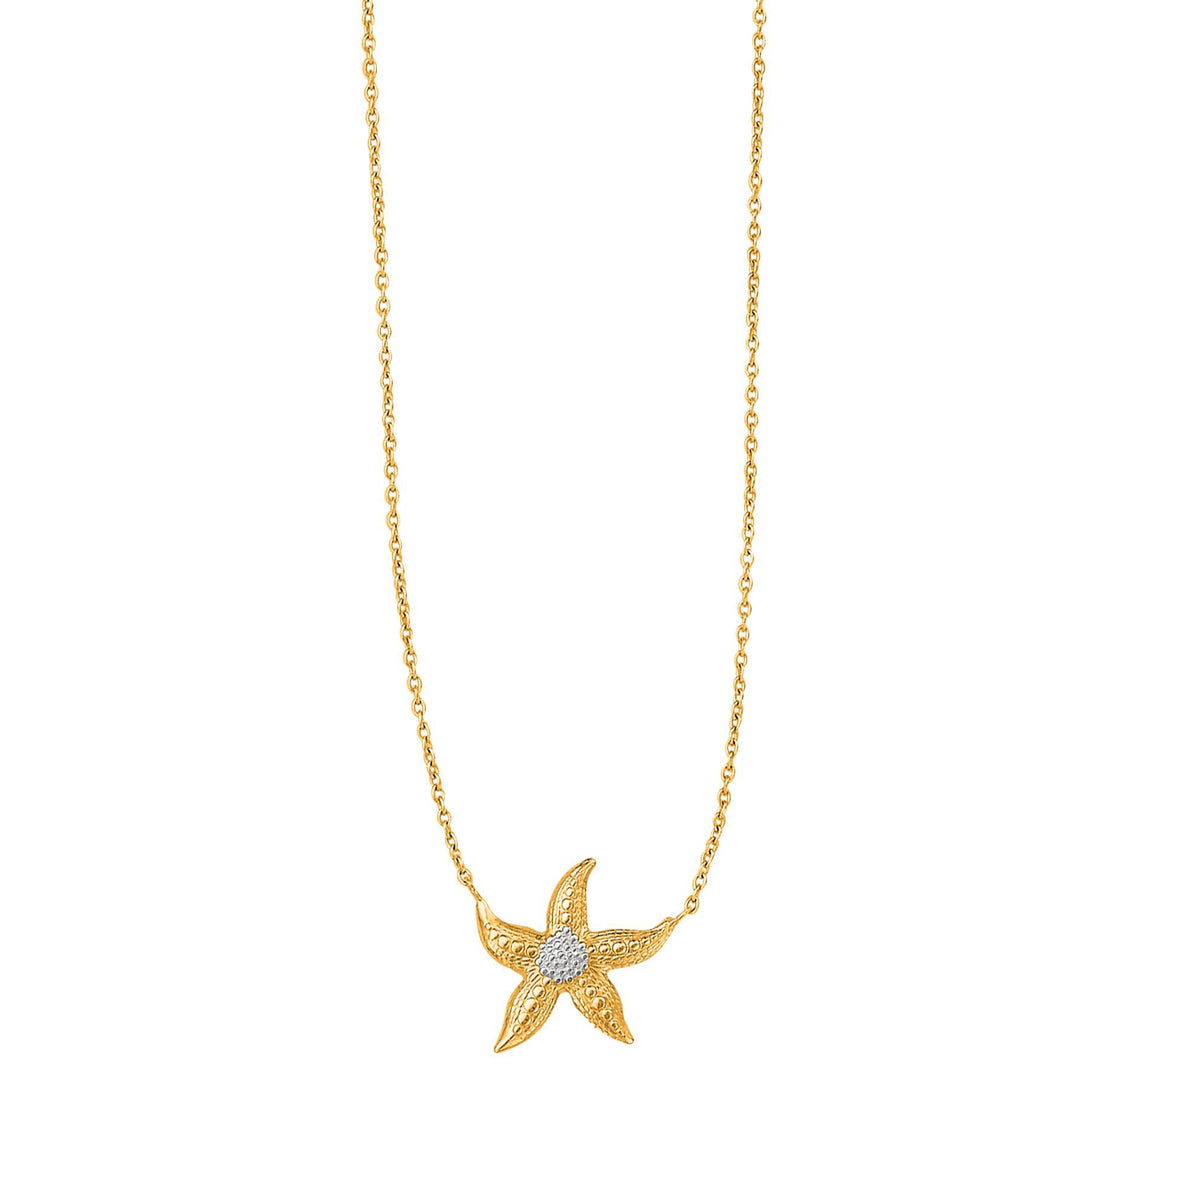 14K Yellow And White Gold Starfish Sea Life Chain Necklace, 18"